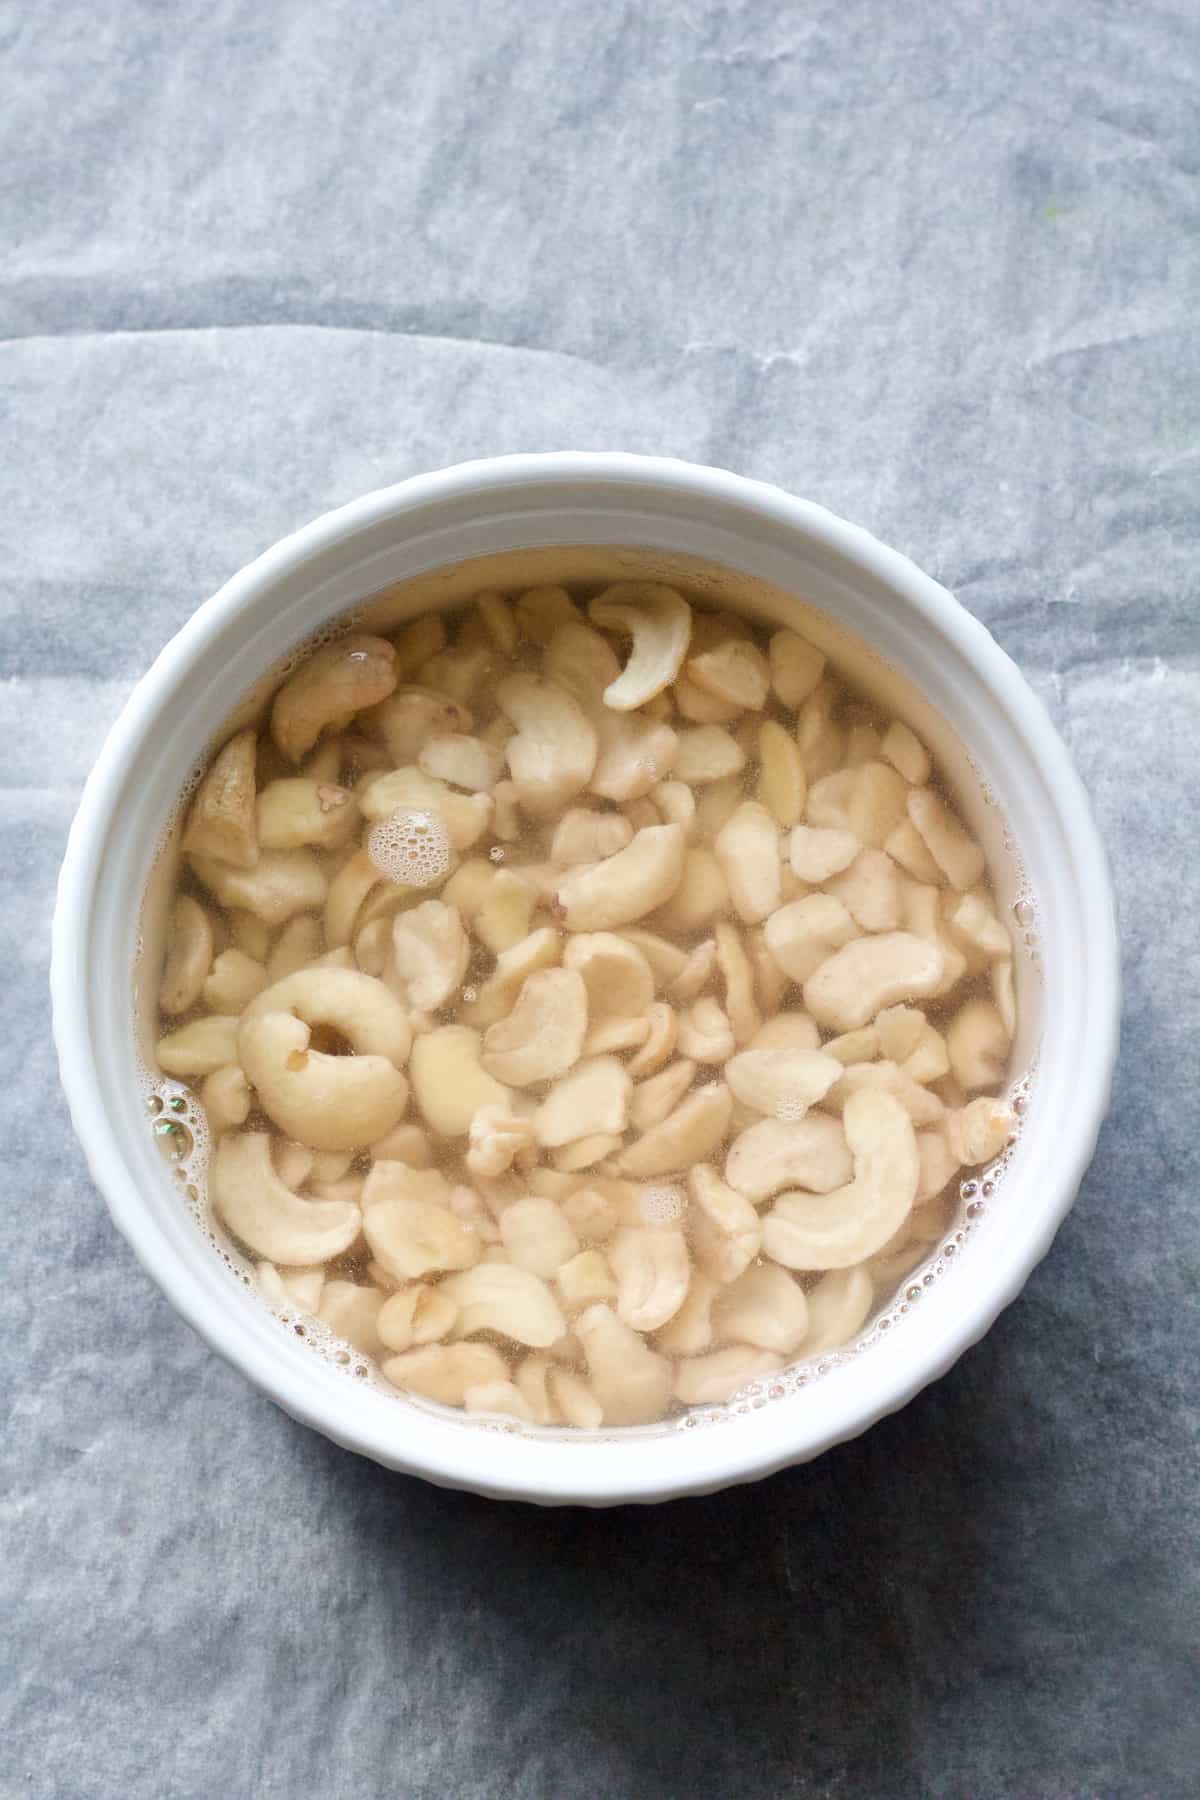 Raw cashew nuts soaking in a bowl of water.